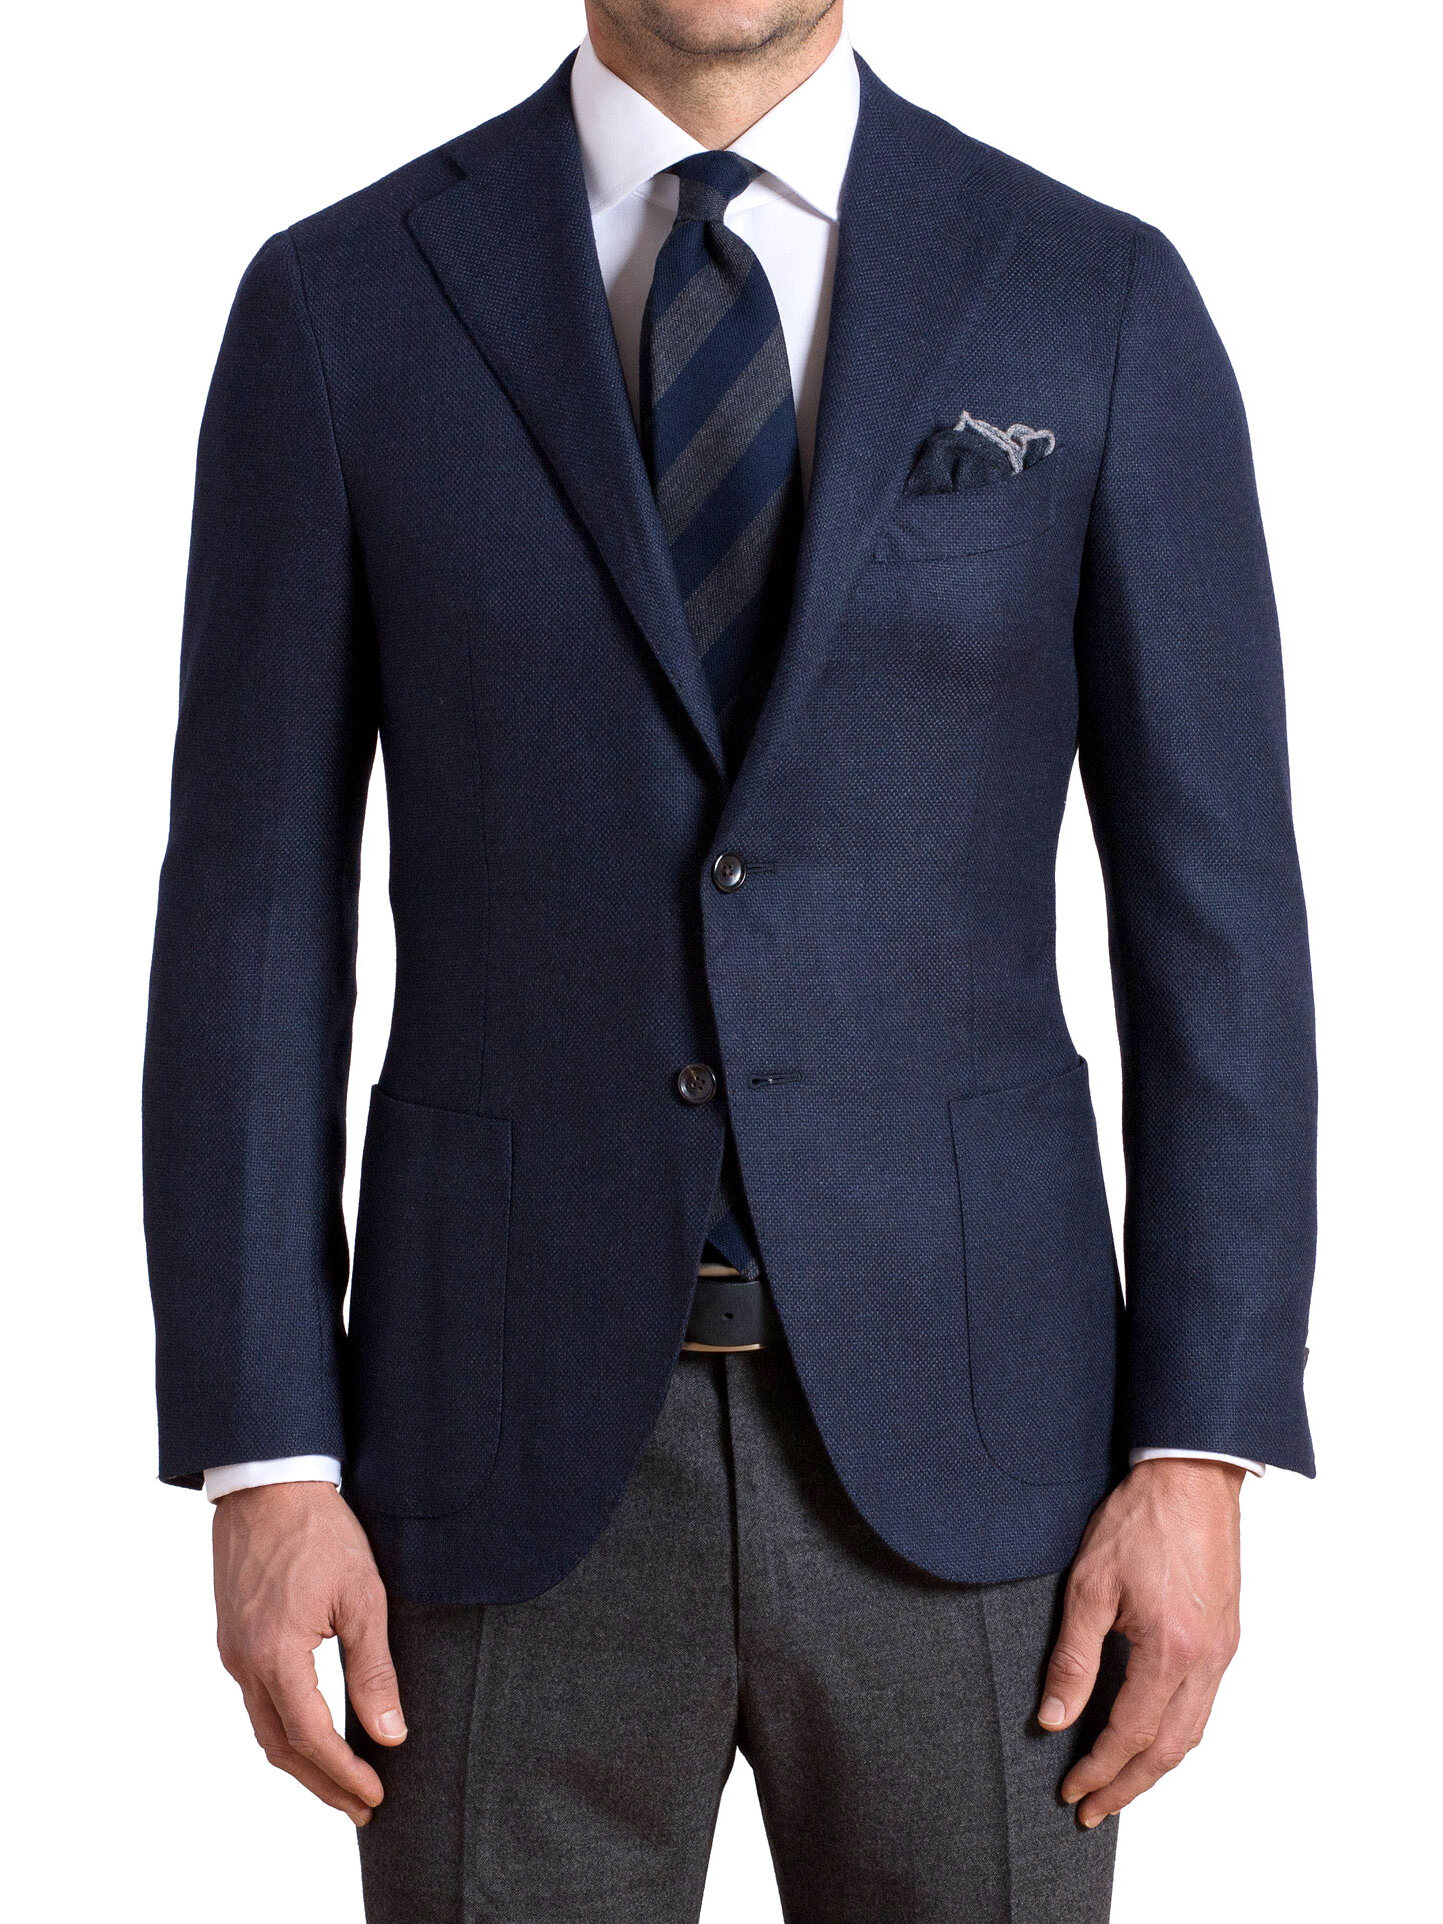 Hudson Navy Wool and Cashmere Flannel Hopsack Jacket by Proper Cloth